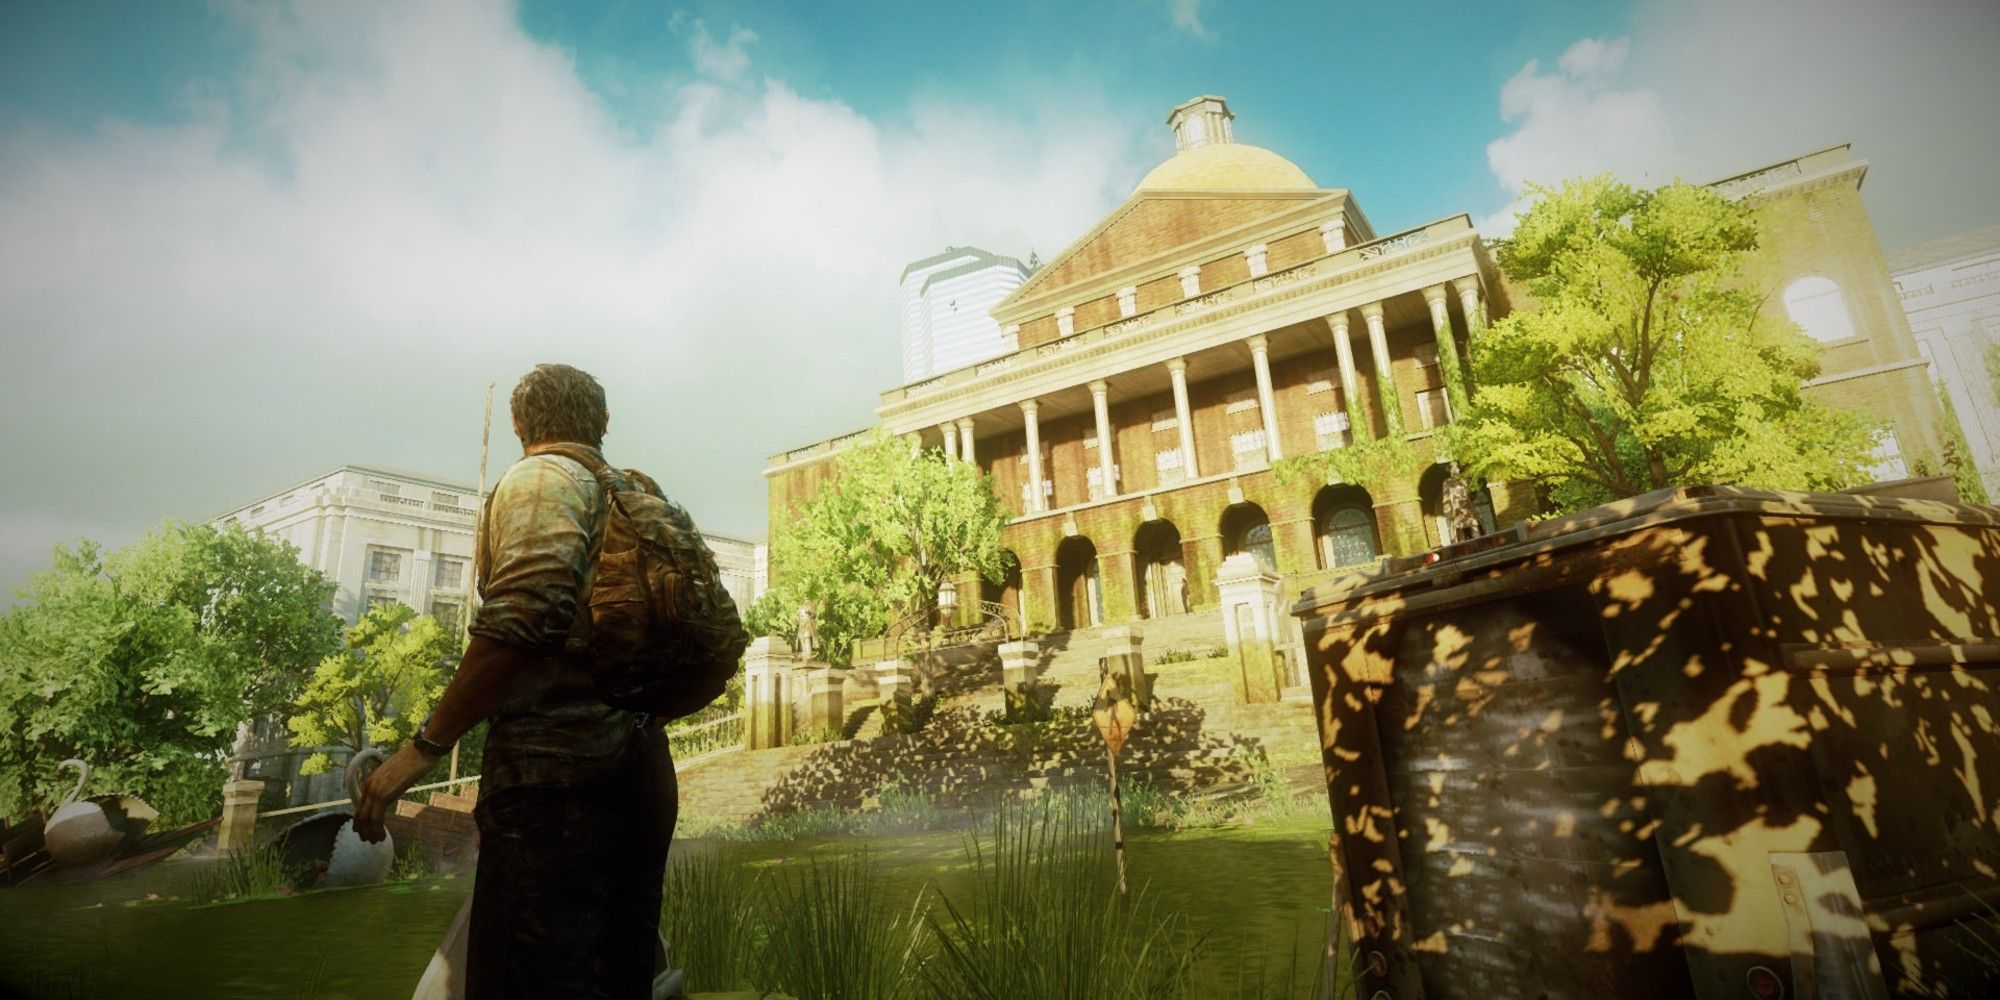 Beta Scan: “The Last of Us” Review - Highlander